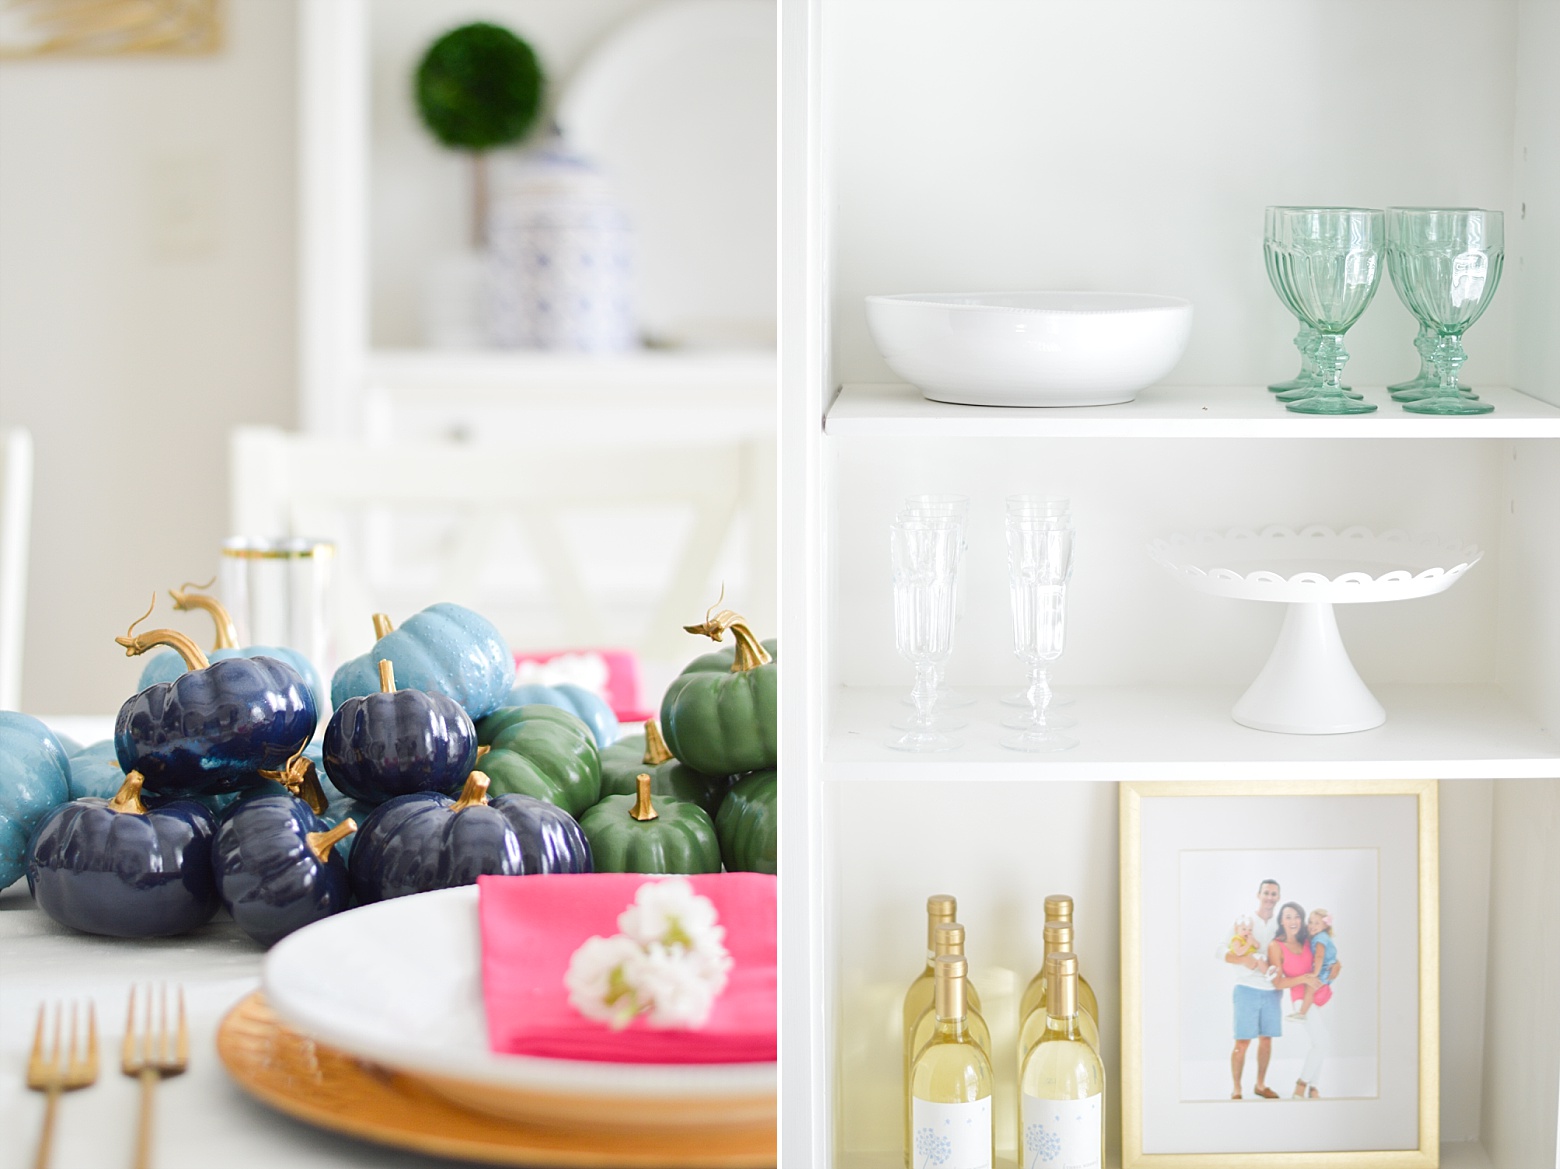 Fall Home Tour with Bright Colorful Painted Pumpkins